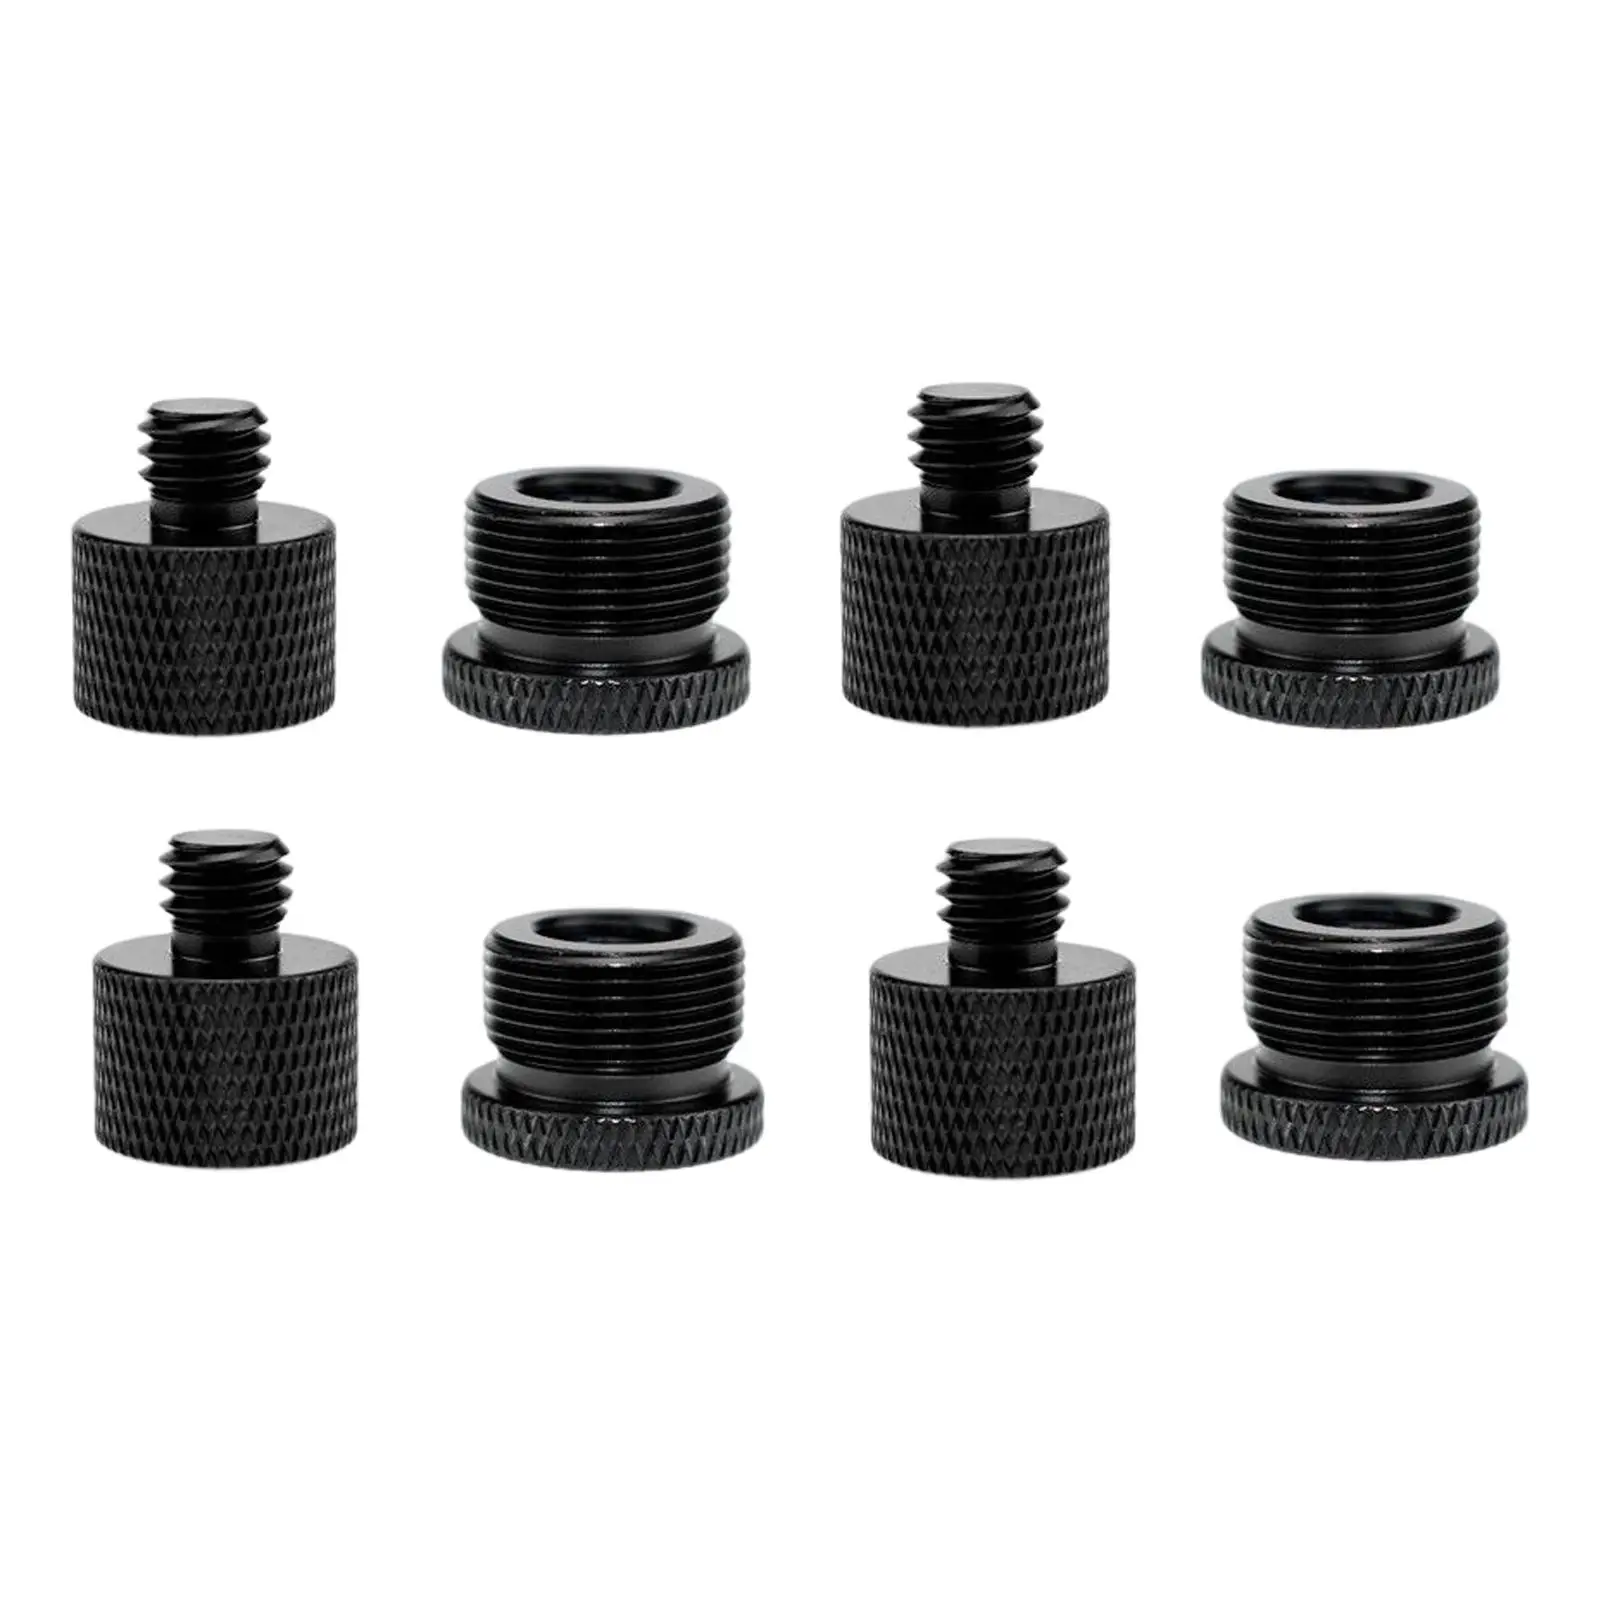 8 Pieces Mic Thread Adapter Set Screw Adapter Thread Mic Stand Adapter for Microphone Stand